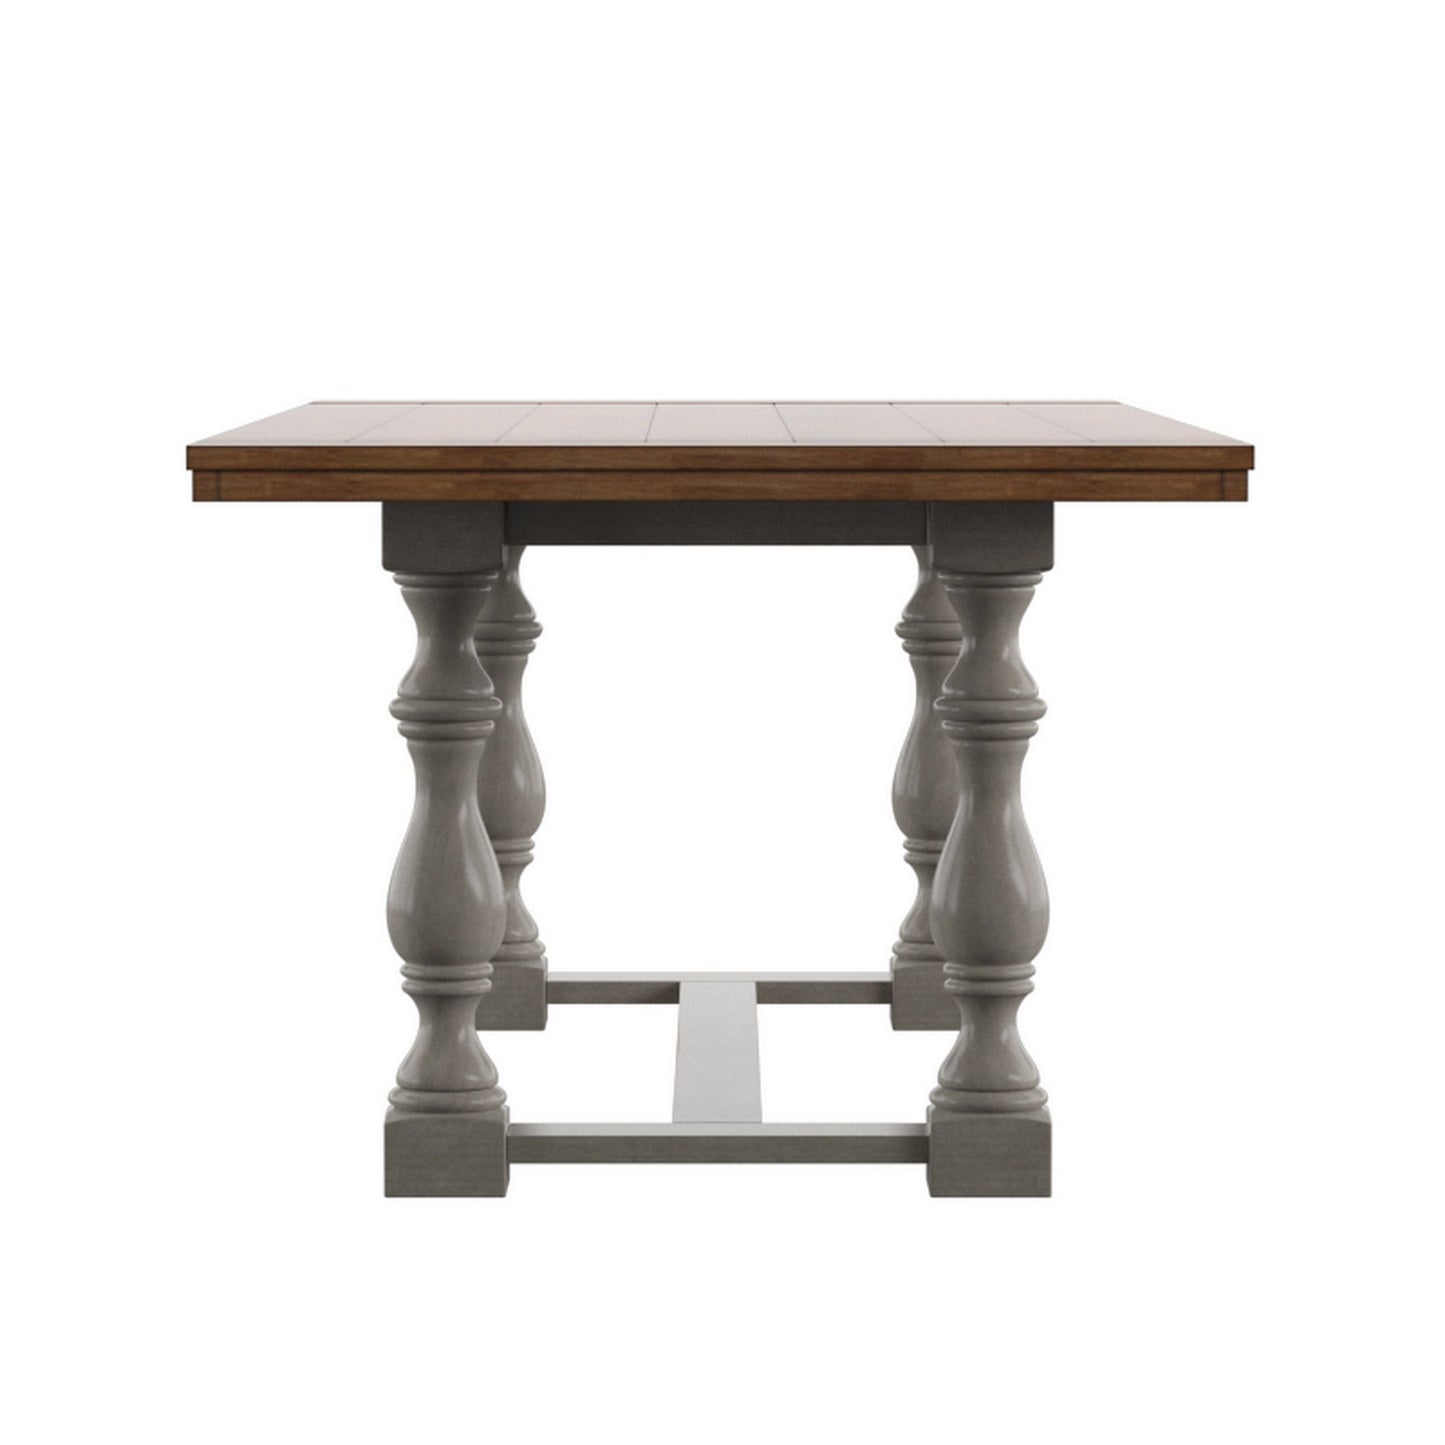 78-inch Oak Top Dining Table with Turned Leg Trestle Base - Oak Top with Antique Grey Base